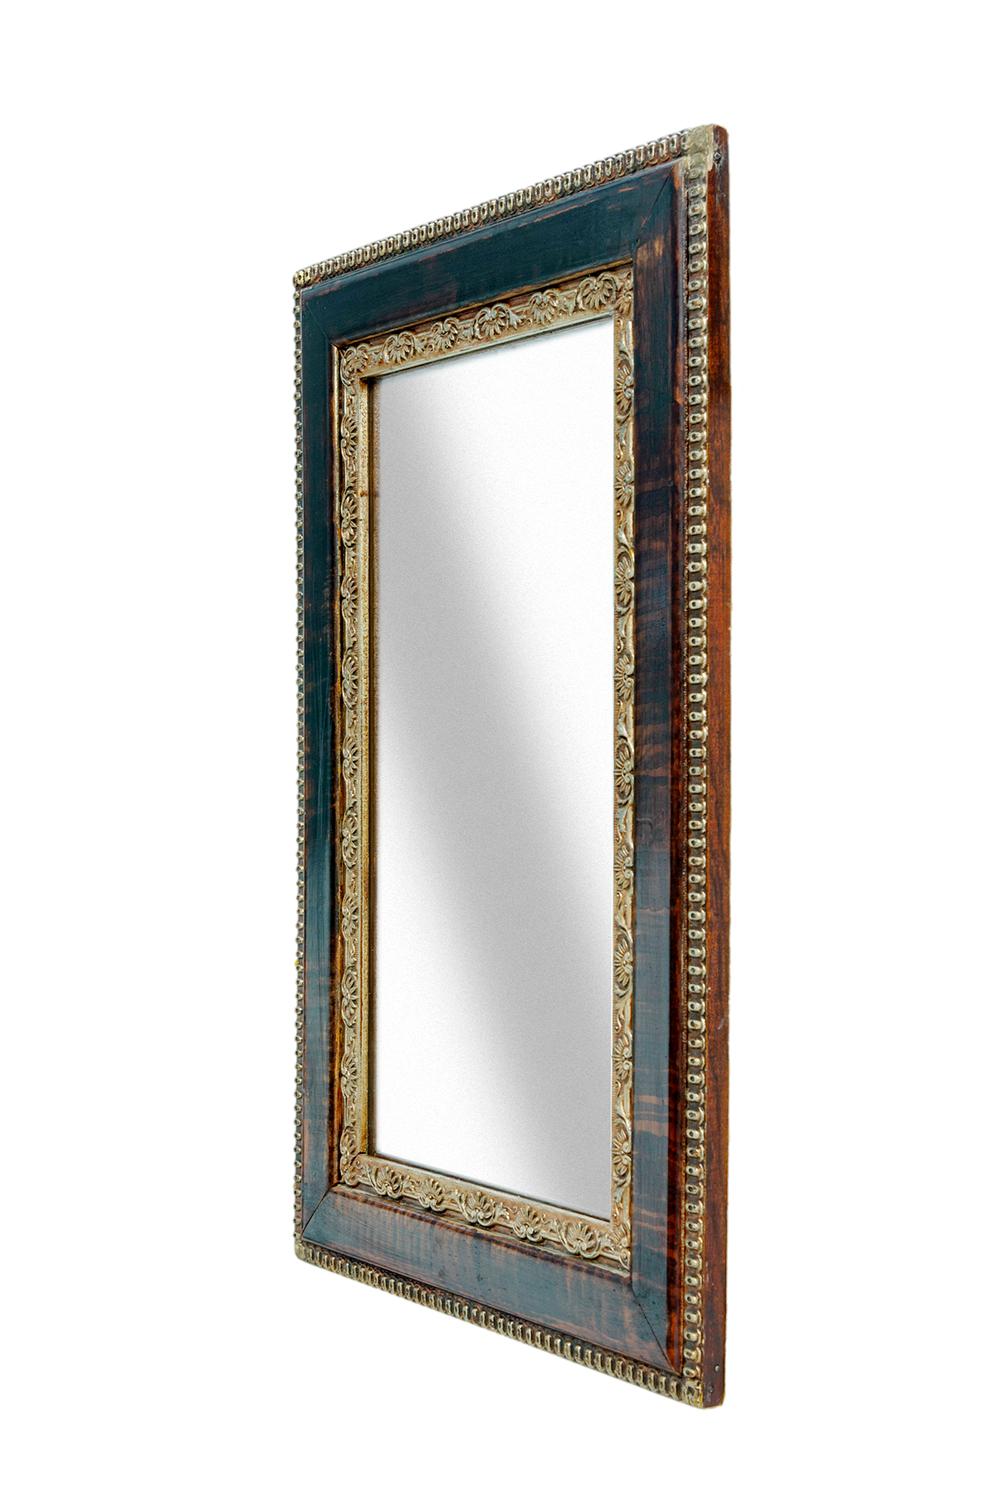 Victorian oak framed mirror with faux finish glaze.
Blonde gold beaded outer border with platinum decorative insert frame. New mirror.
Wired to hang horizontally & vertically.